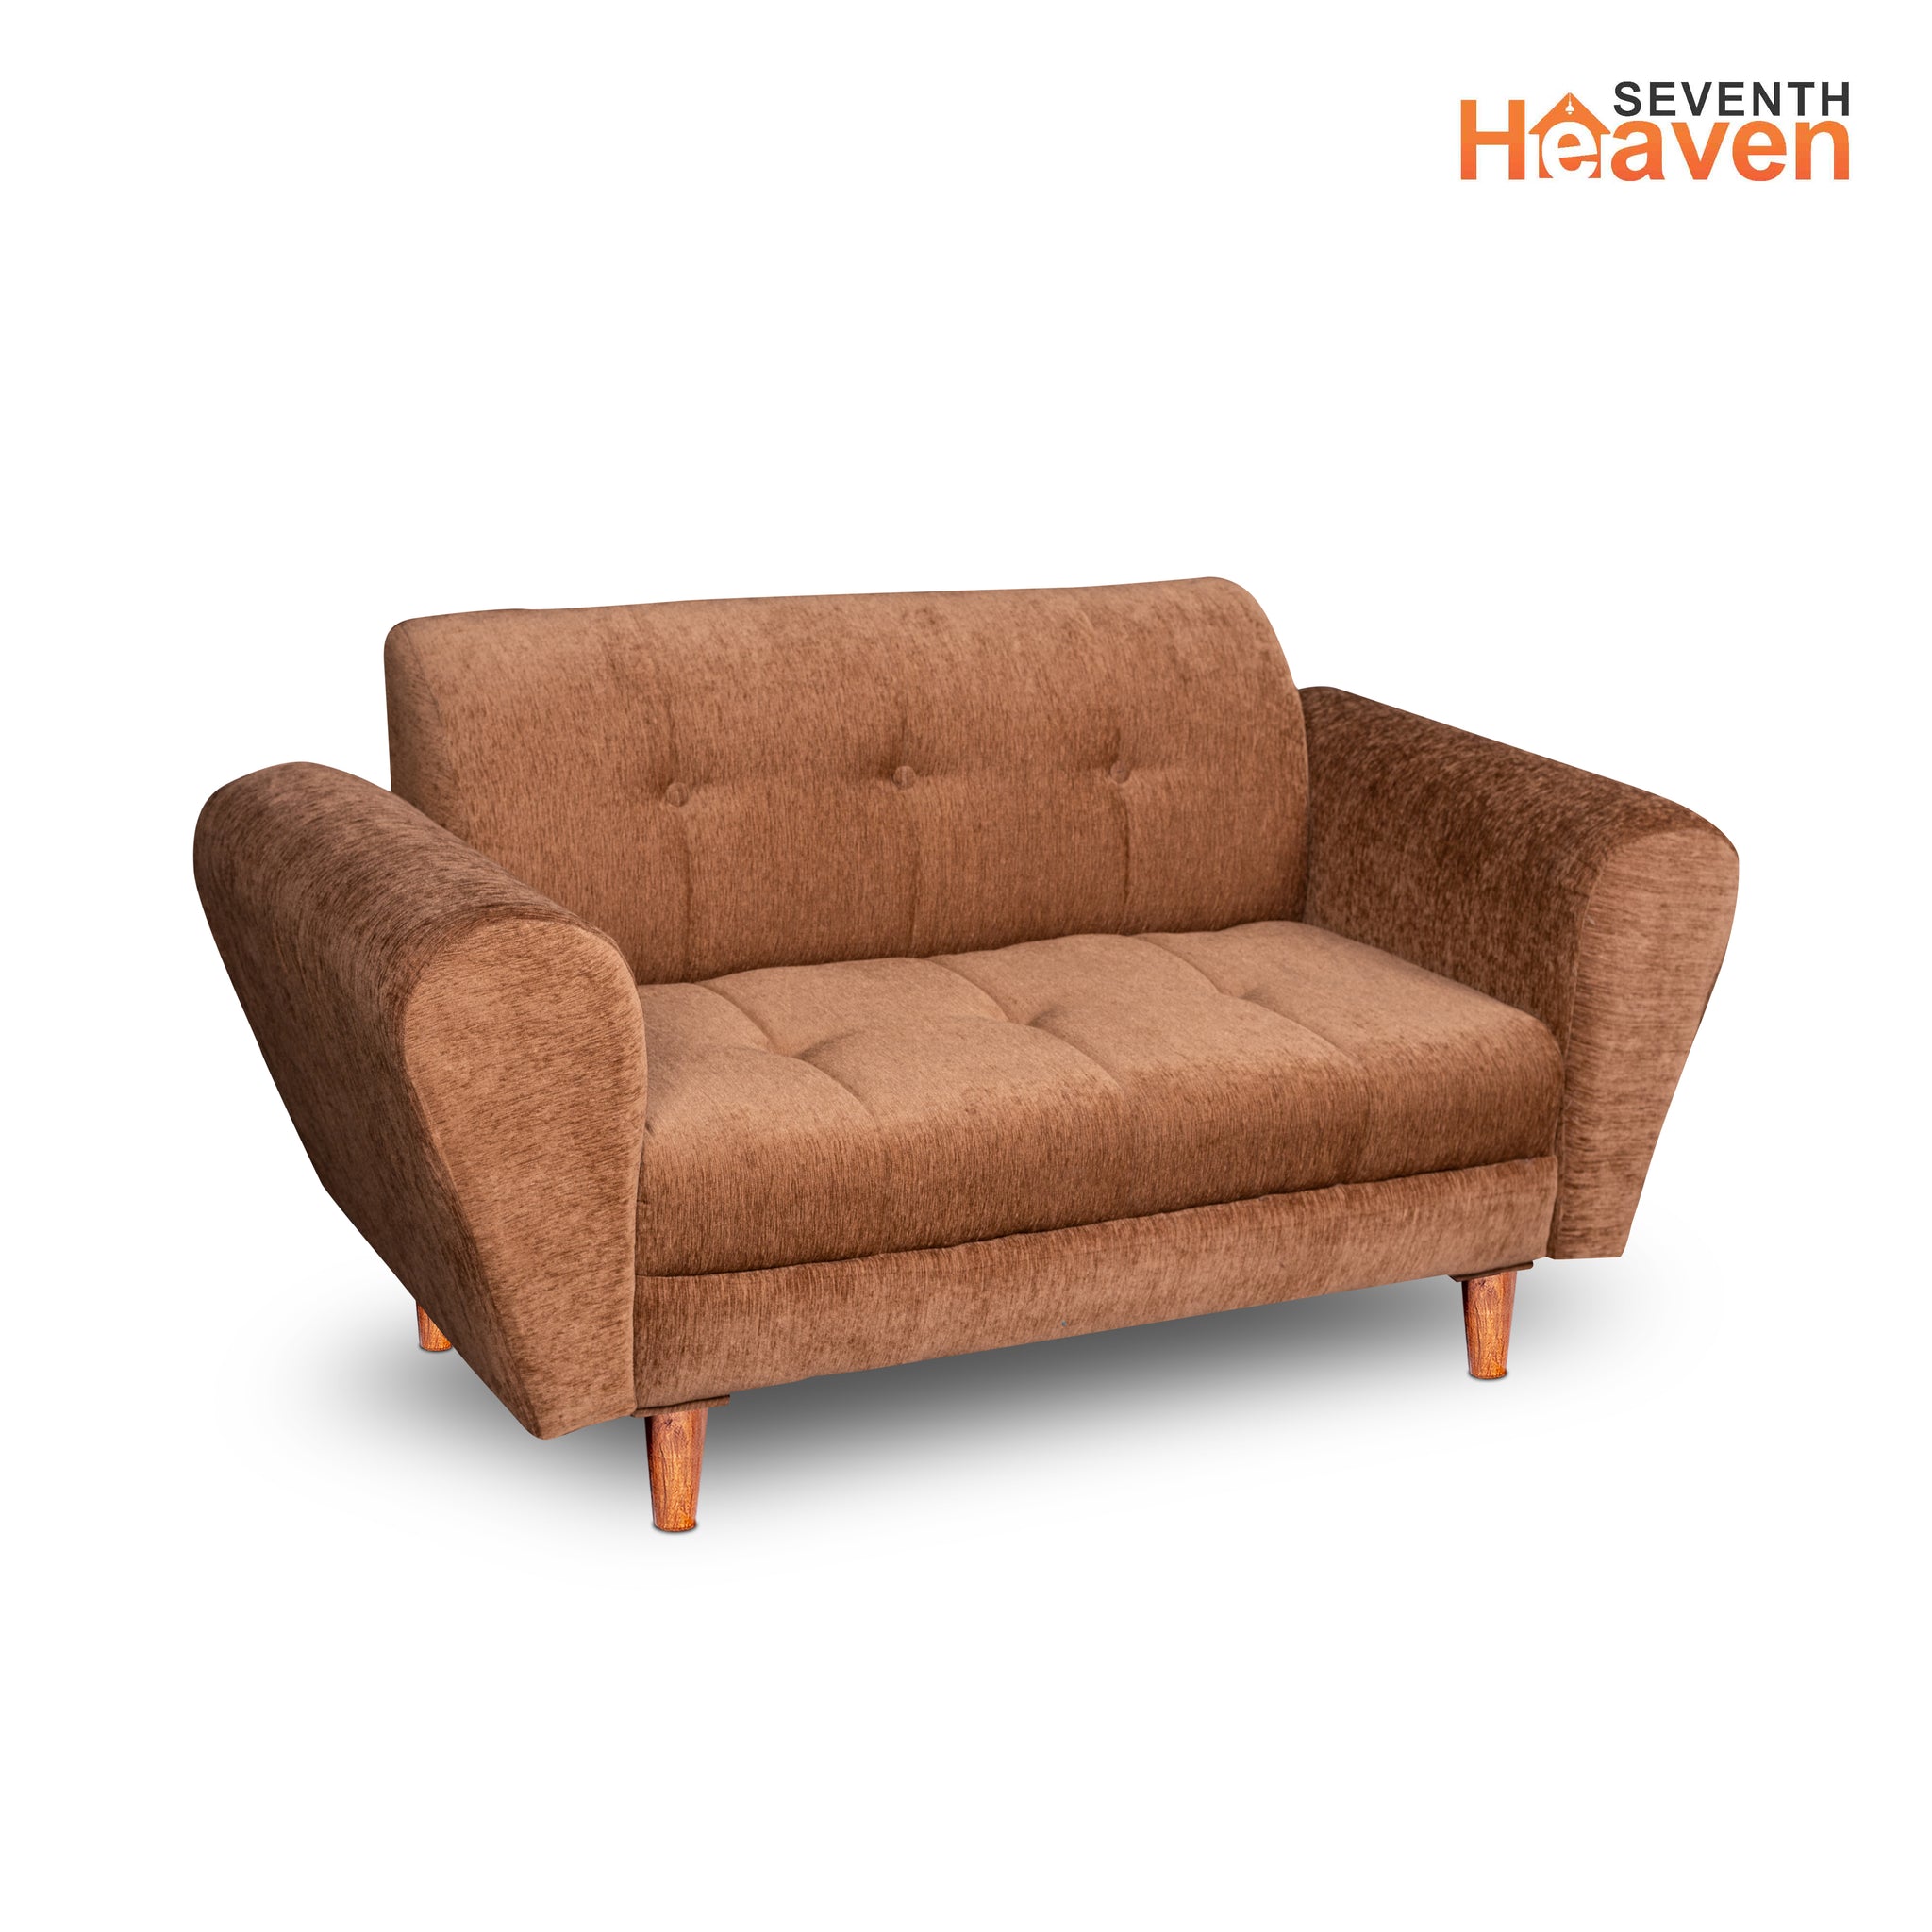 Seventh Heaven Milan 2 Seater Wooden Sofa Set Modern & Elegant Smart Furniture Range for luxurious homes, living rooms and offices. Beige Colour Molphino fabric with sheesham polished wooden legs.